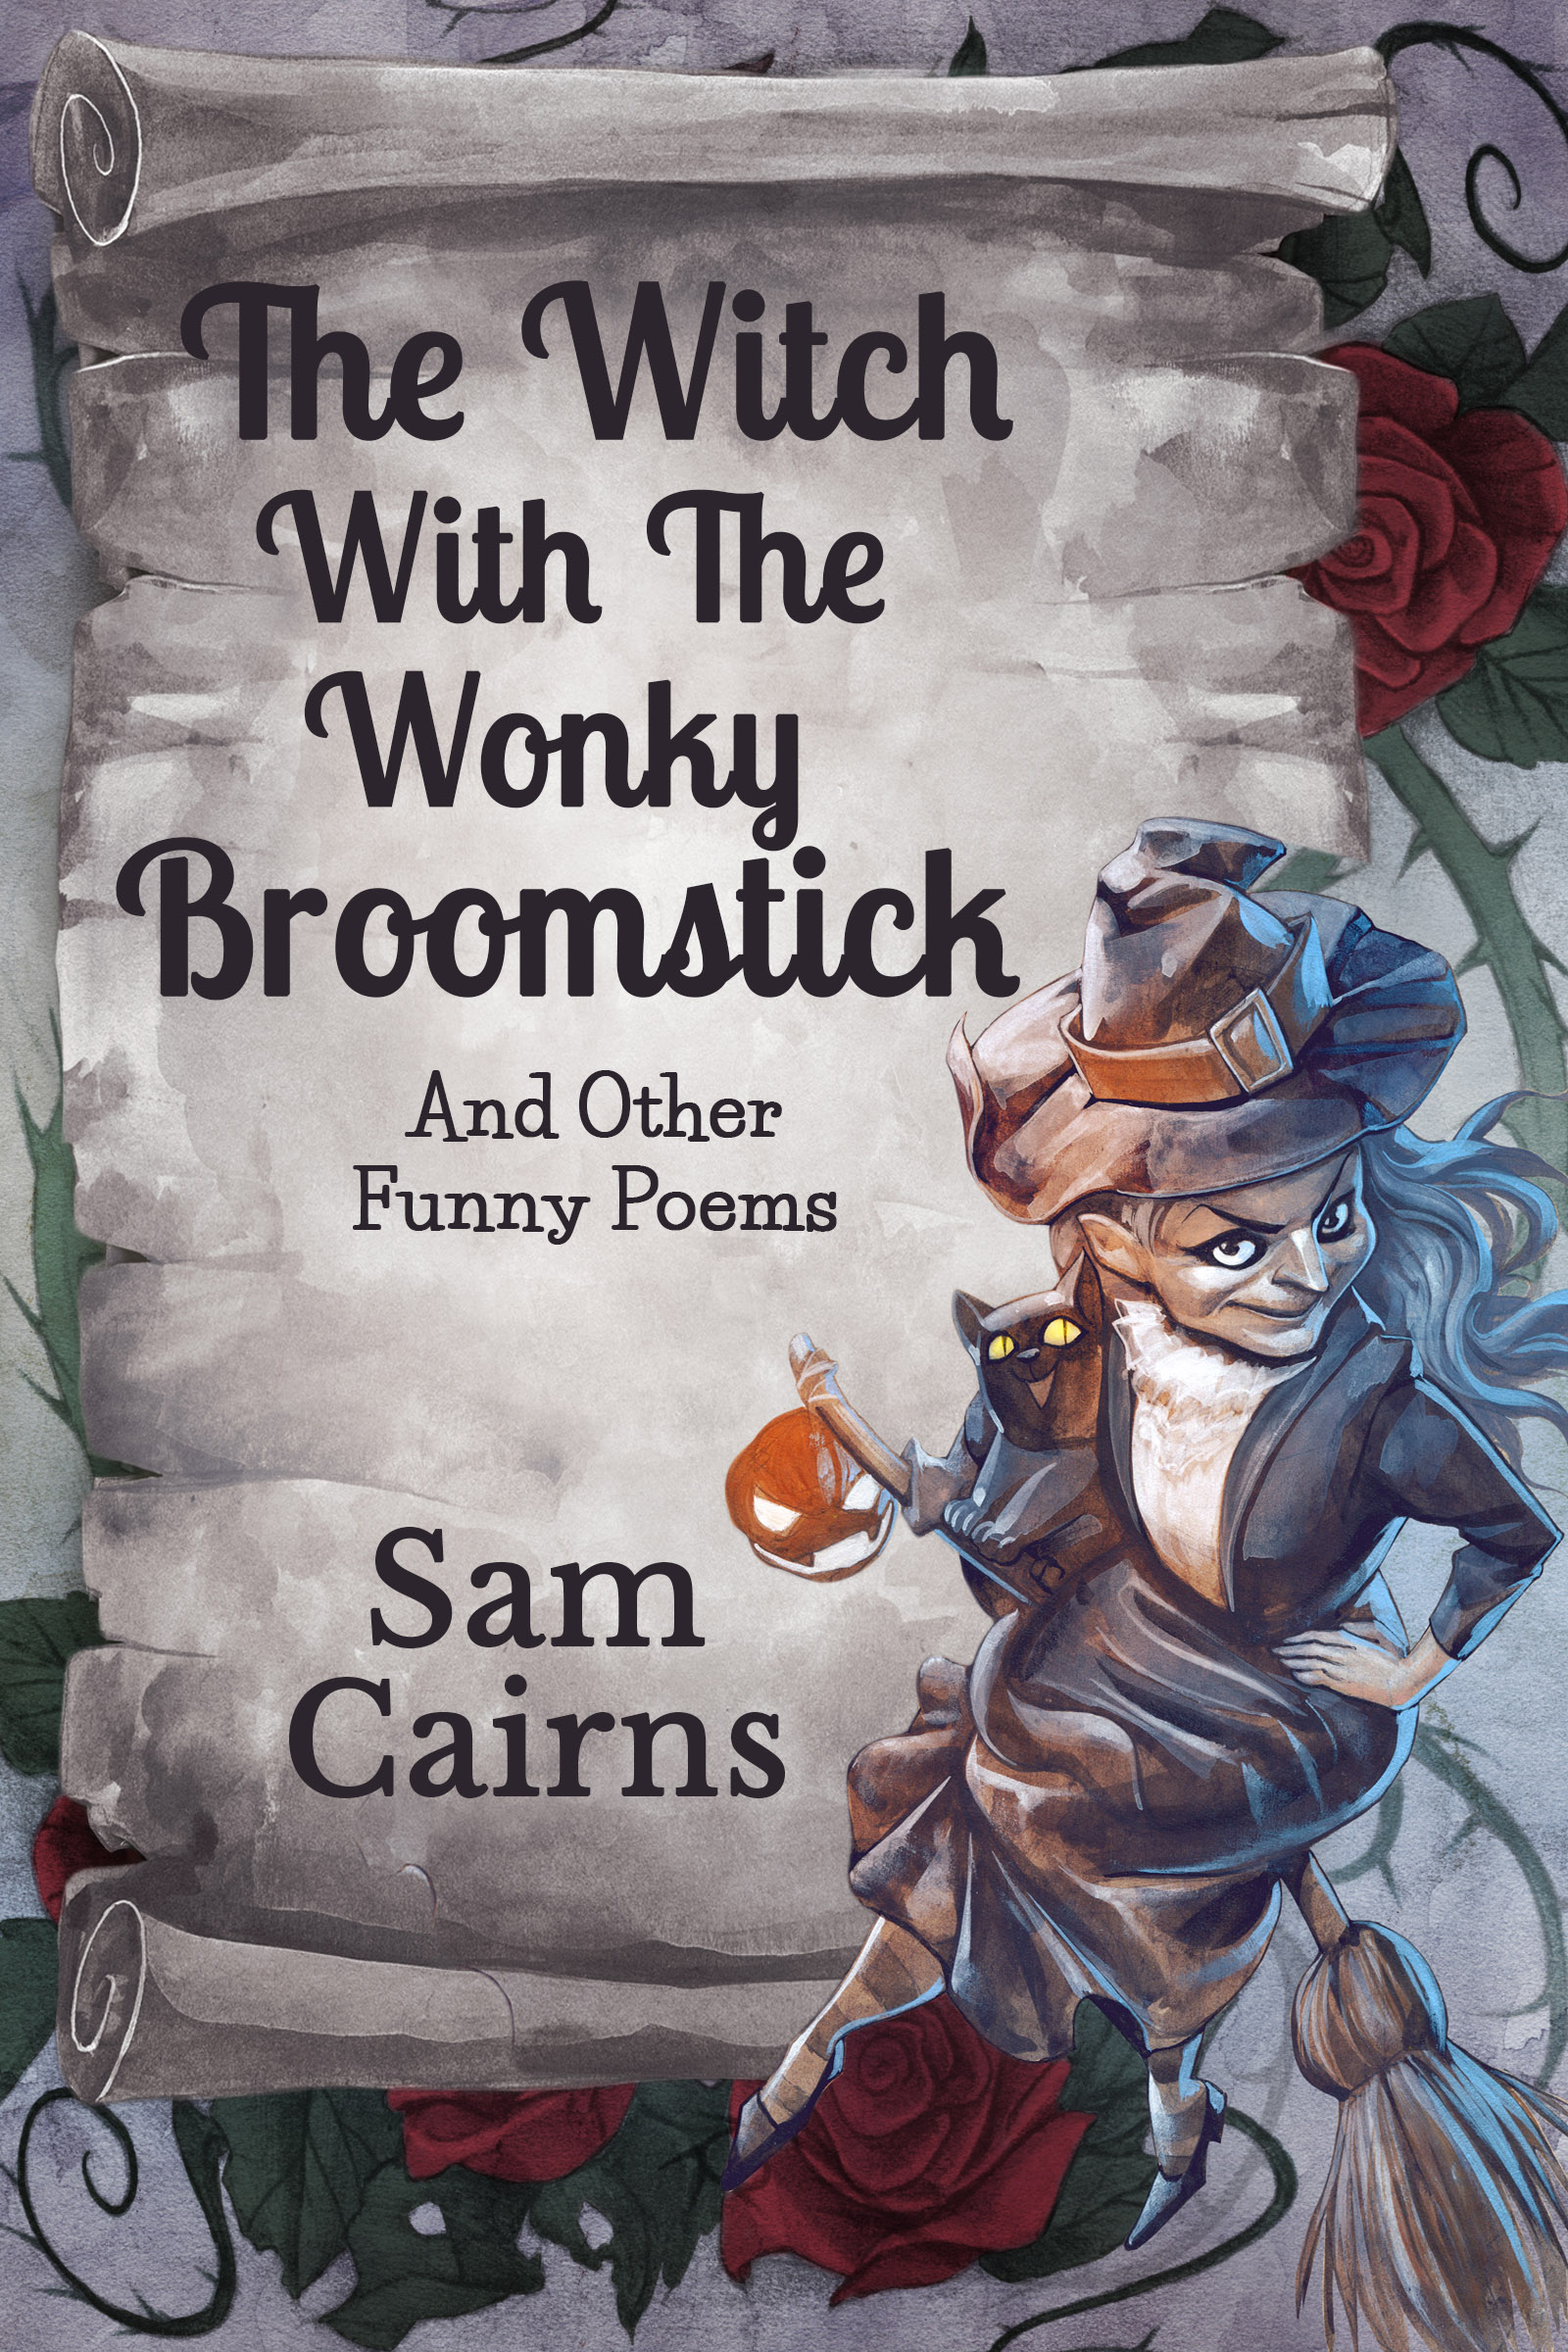 FREE: The Witch With the Wonky Broomstick by Sam Cairns